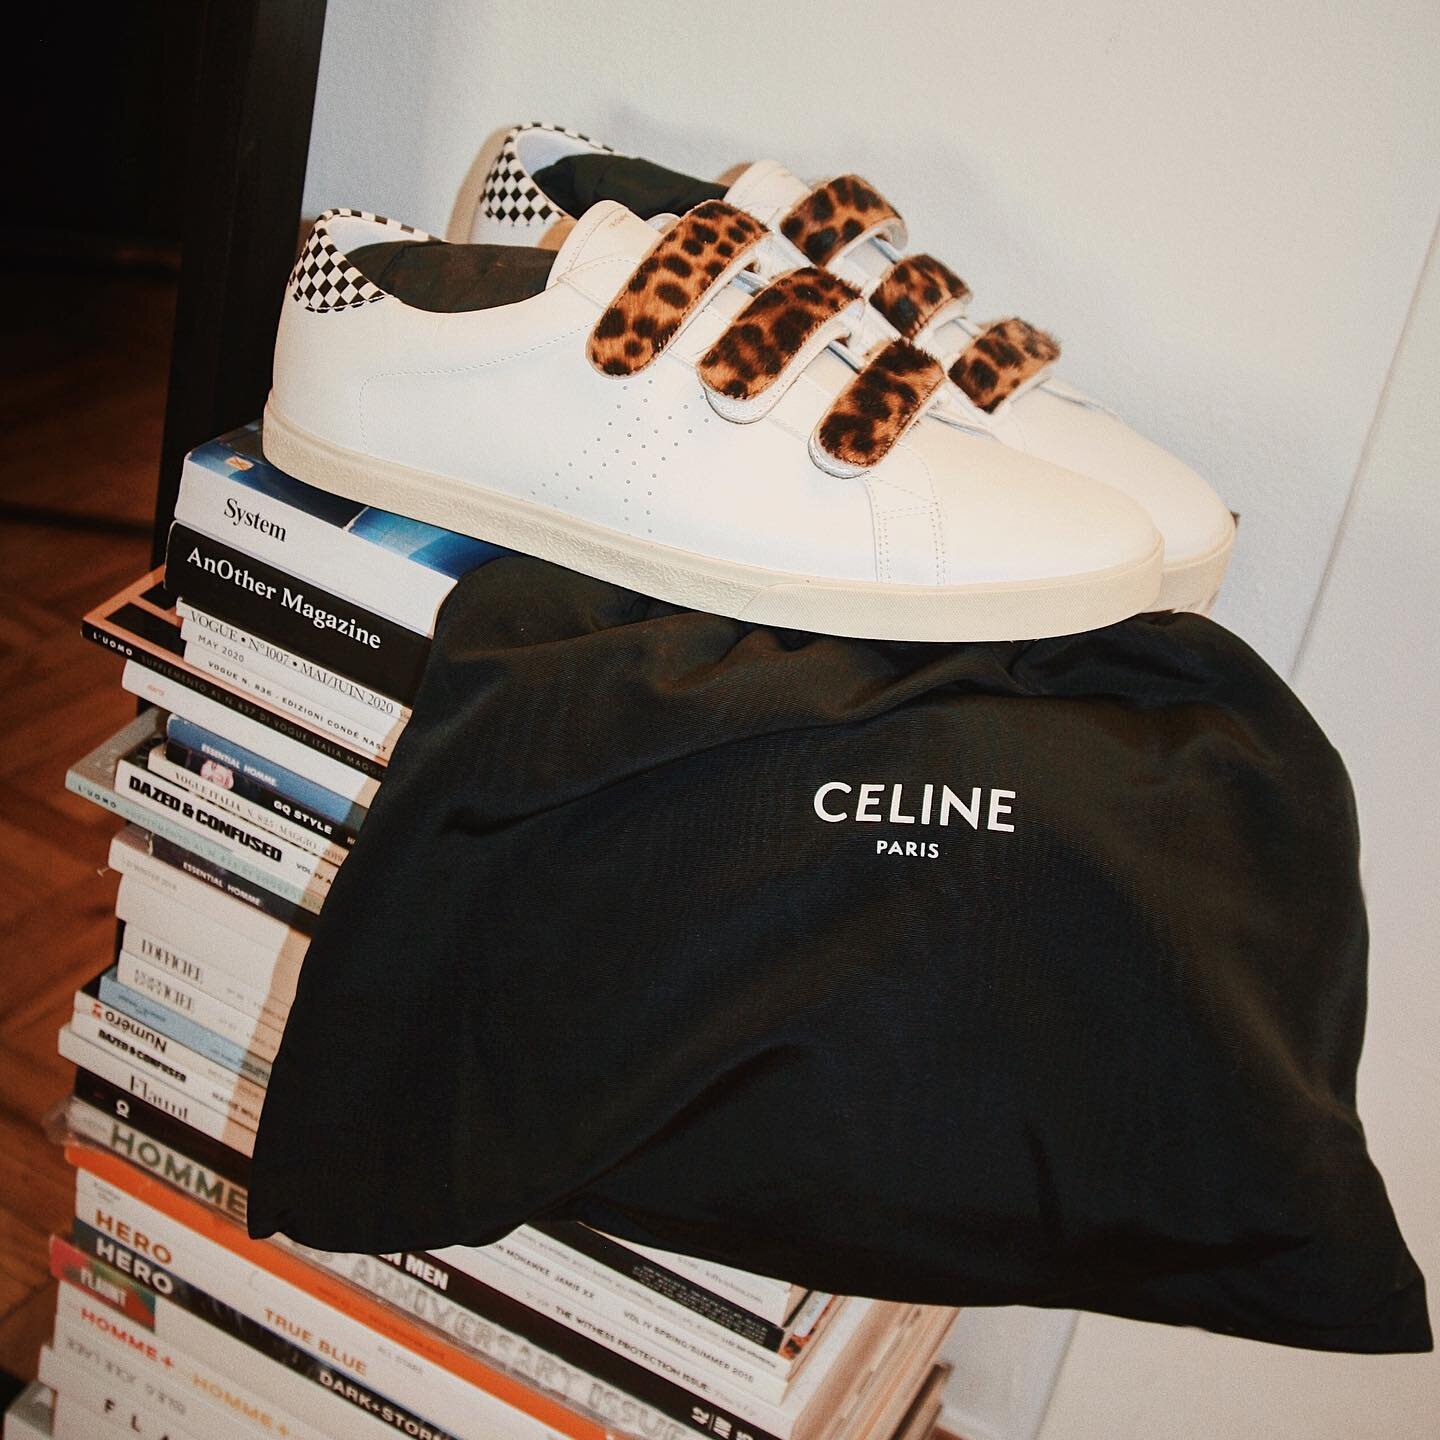 Got those new dancing shoes with nowhere to go... 👟 @celine